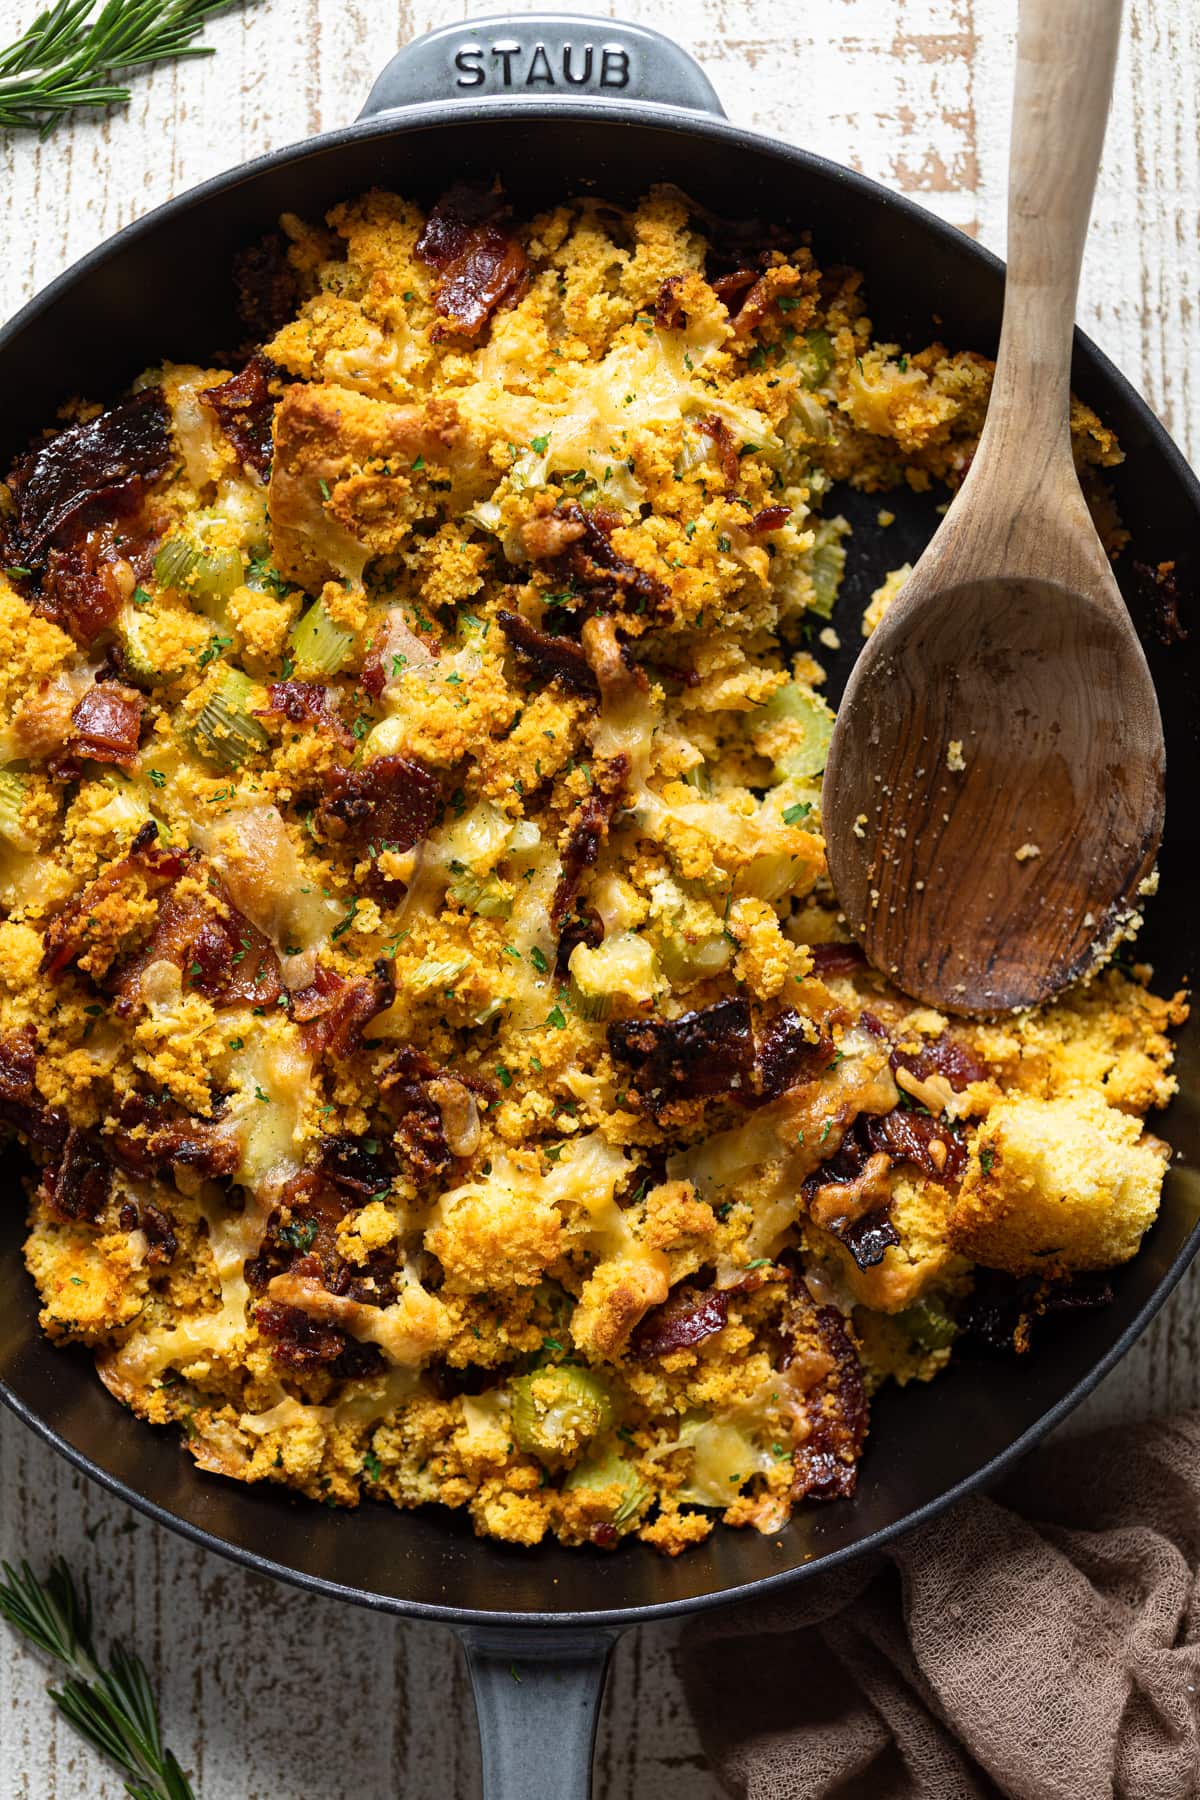 Wooden spoon in a skillet of Southern-Styled Cornbread Stuffing